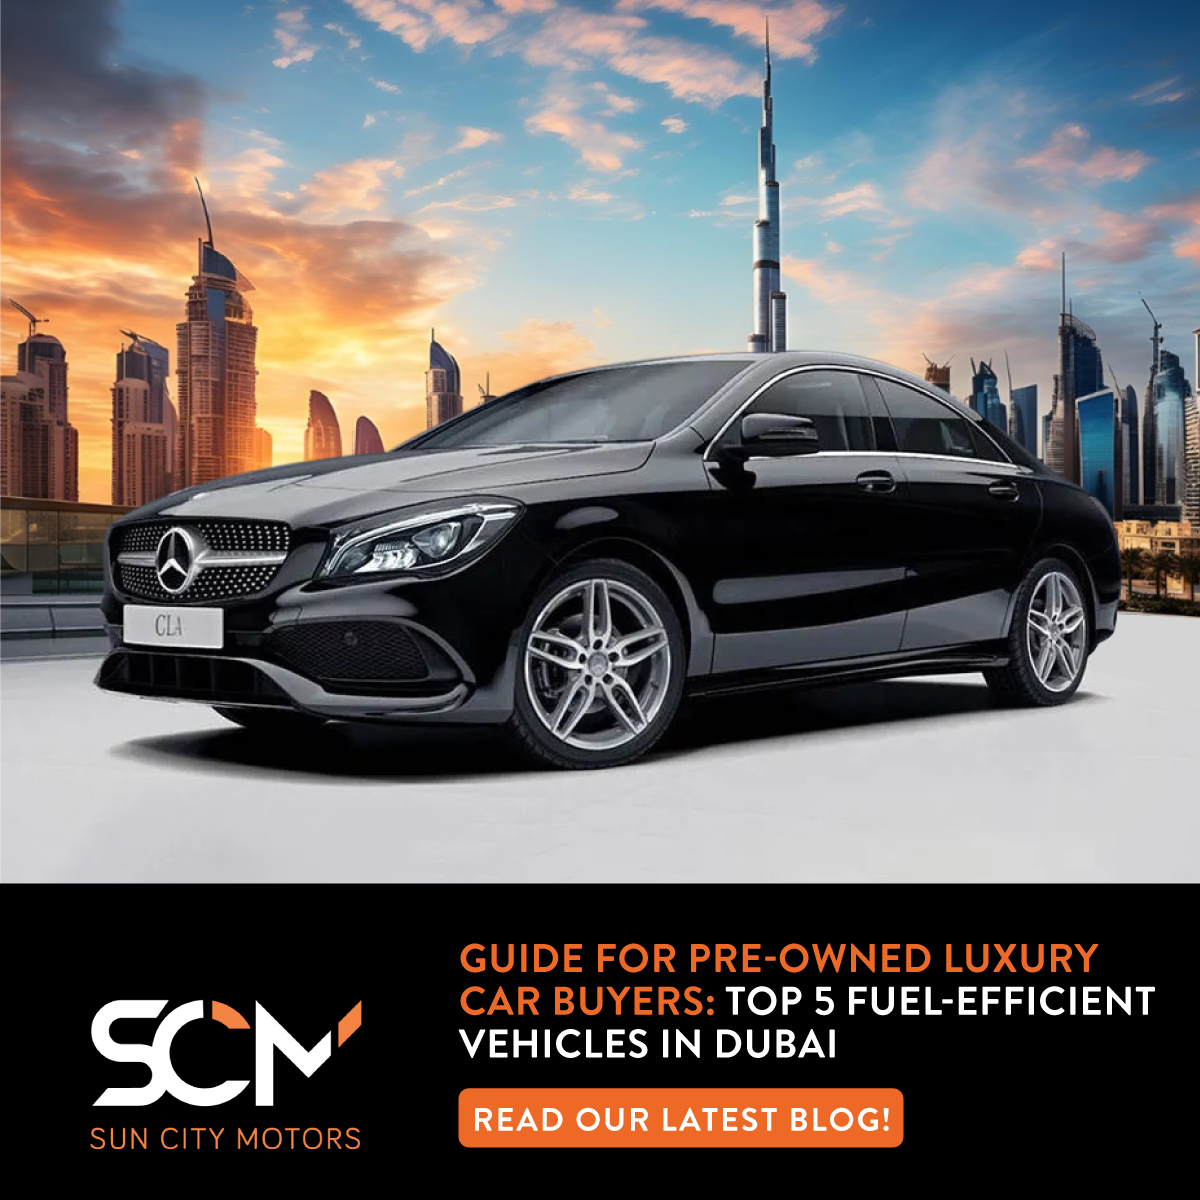 Guide for Pre-owned Luxury Car Buyers: Top 5 Fuel-Efficient Vehicles in Dubai, UAE